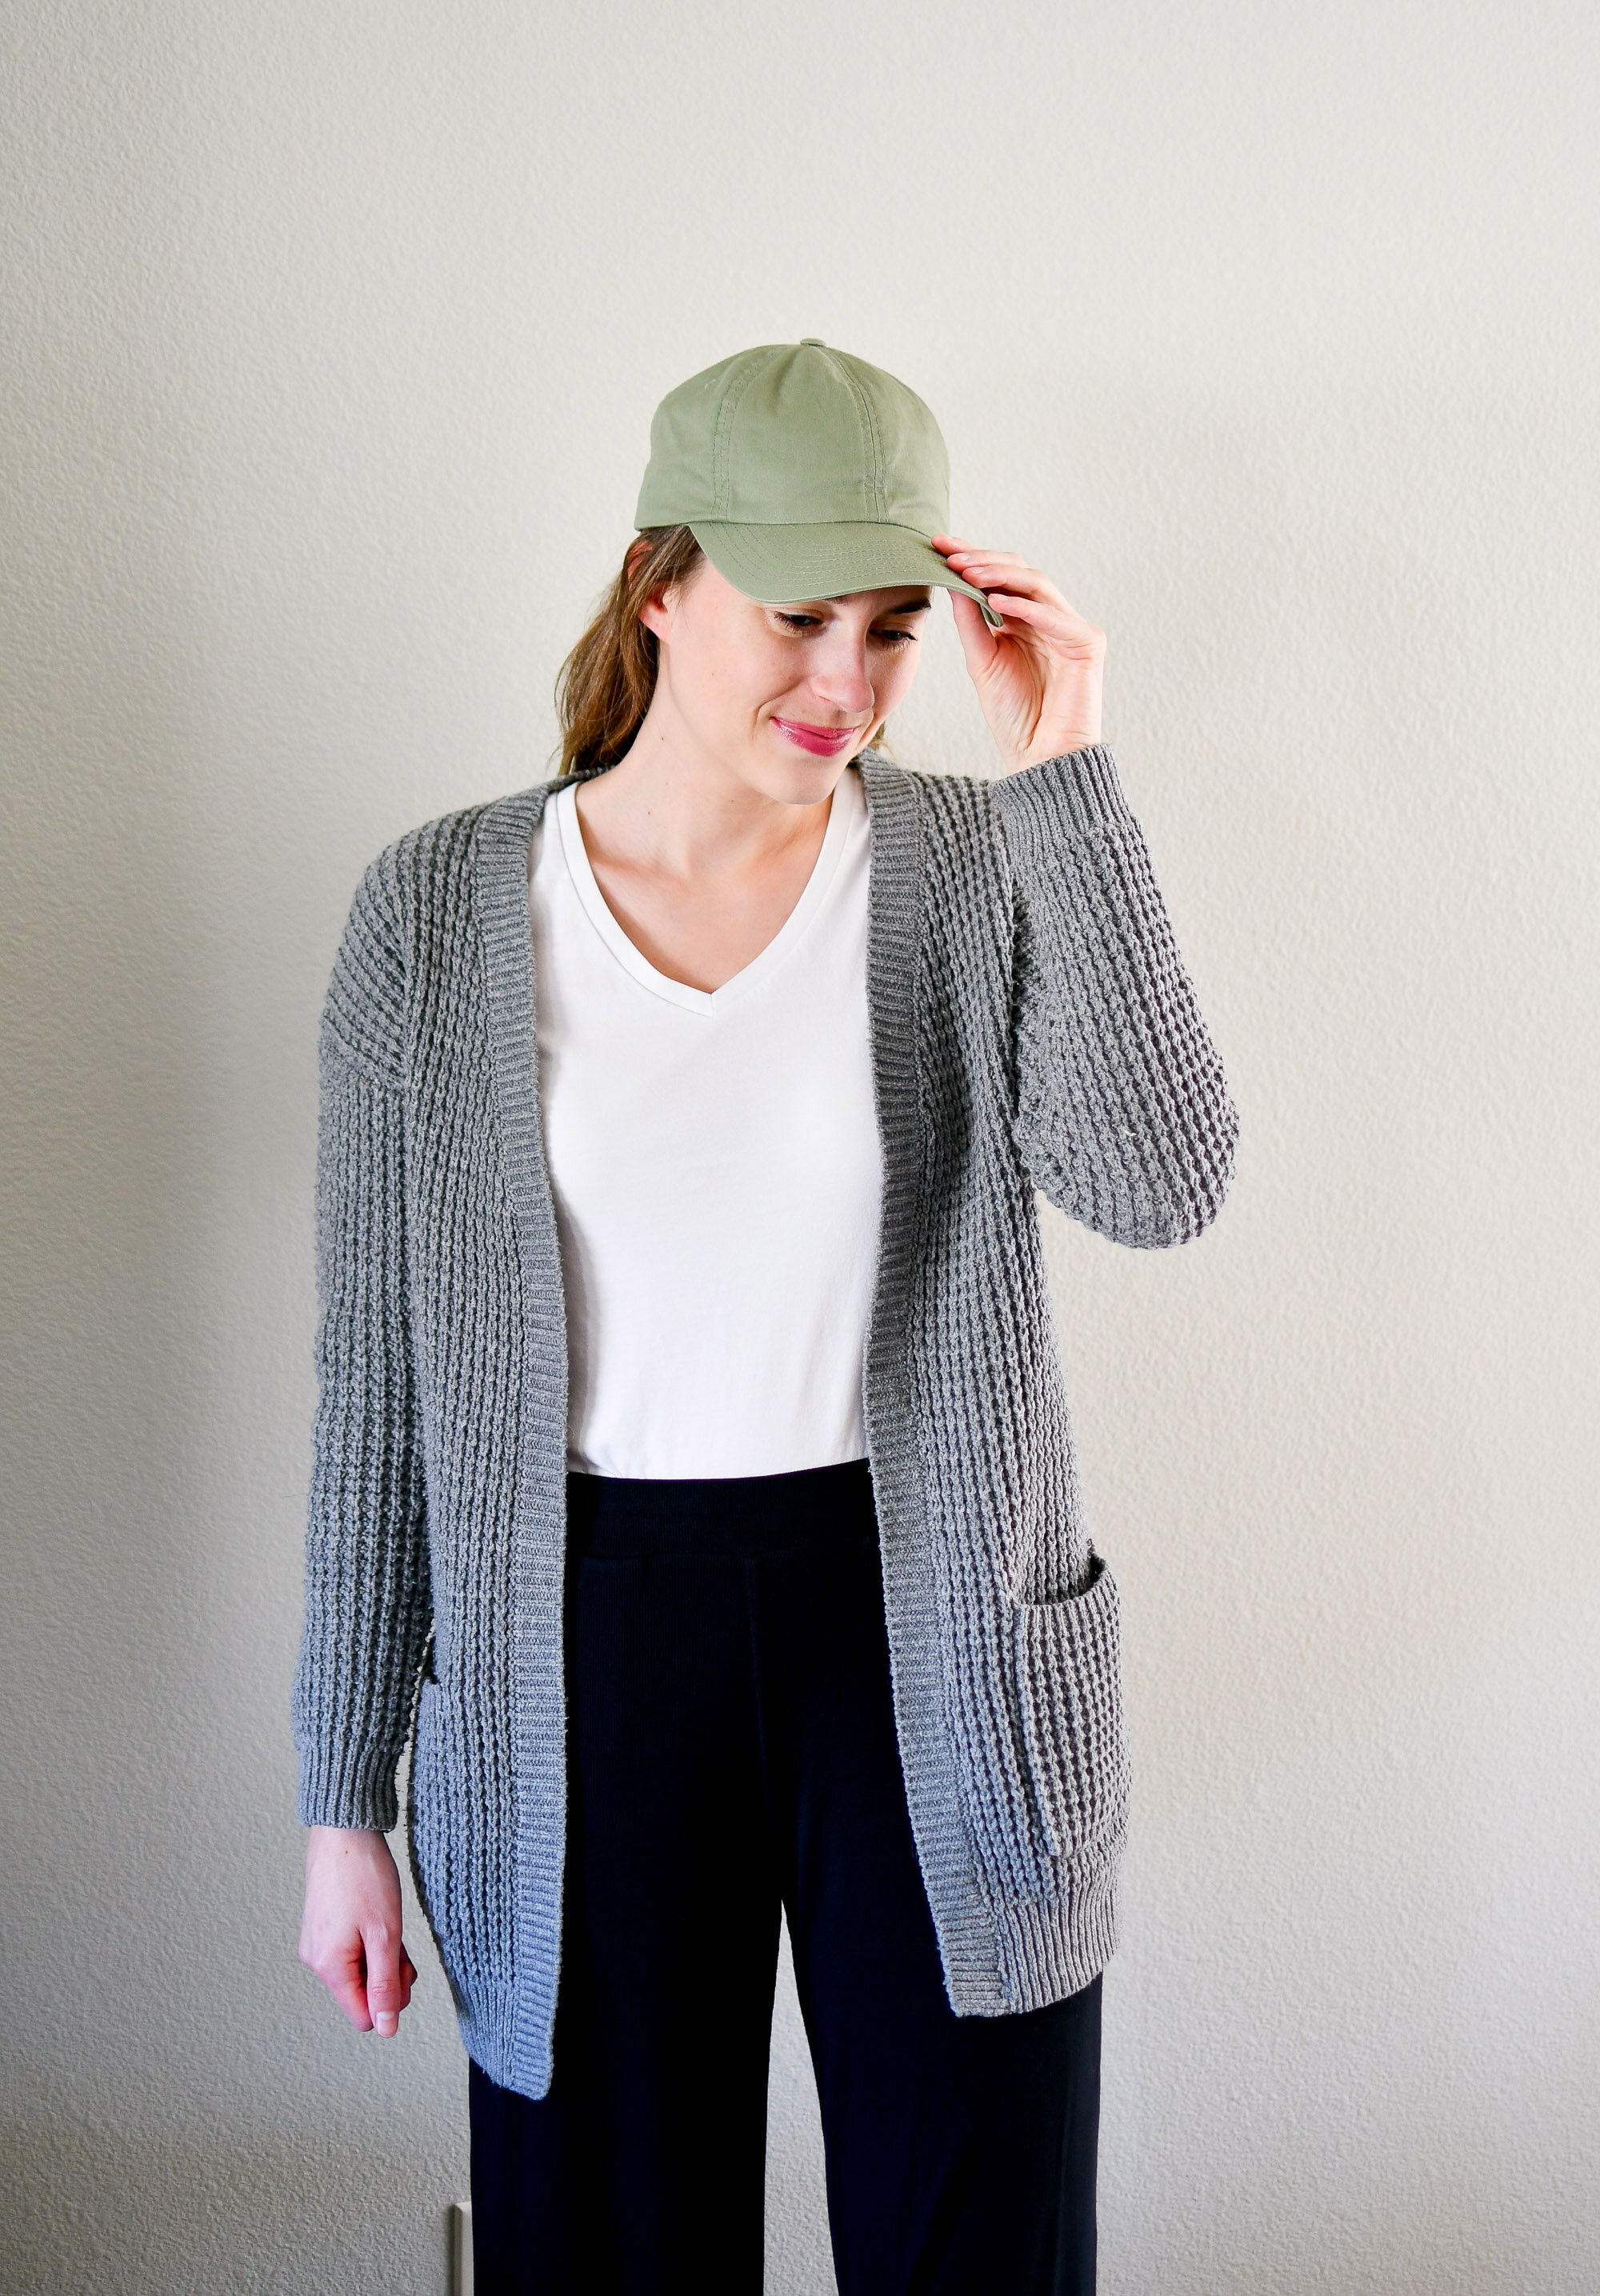 Casual spring outfit with olive green hat, grey cardigan, white tee — Cotton Cashmere Cat Hair